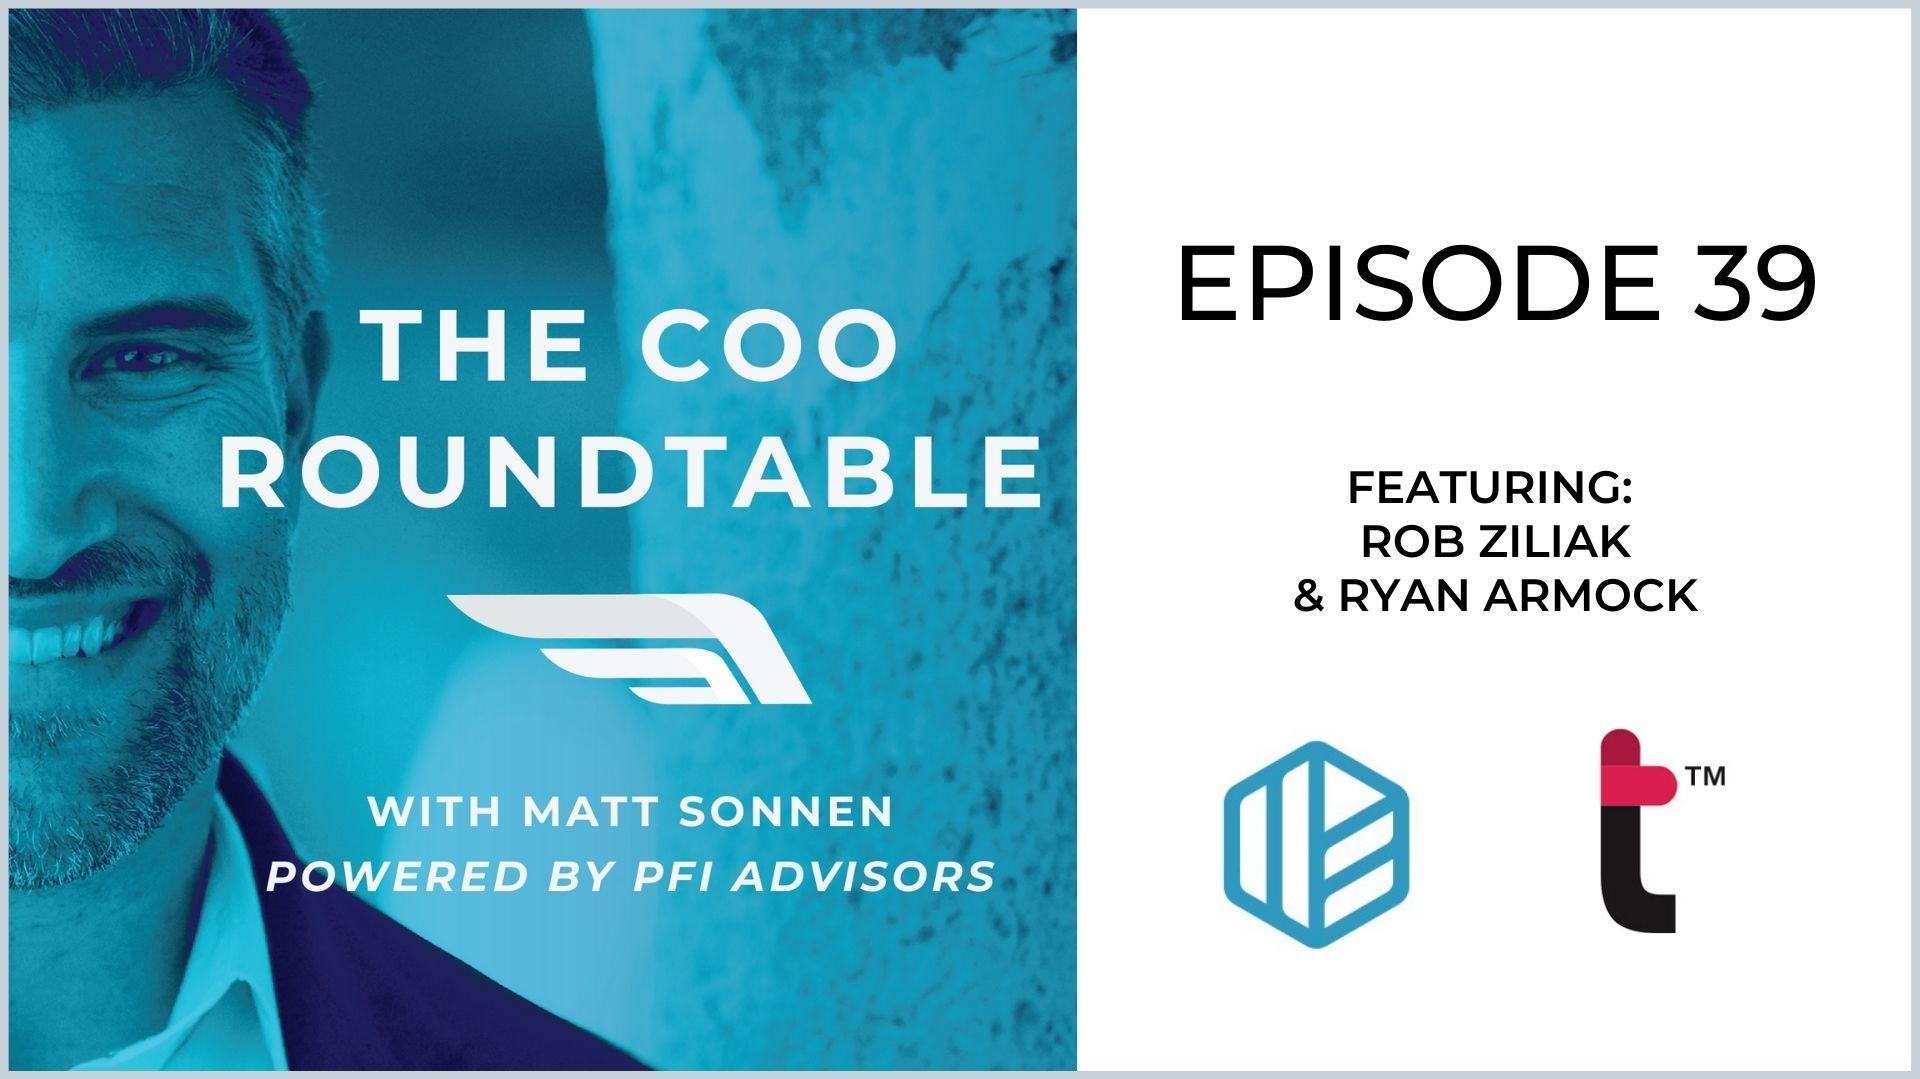 The Coo Roundtable Featuring Jeff Concepcion Nancy Andrefsky